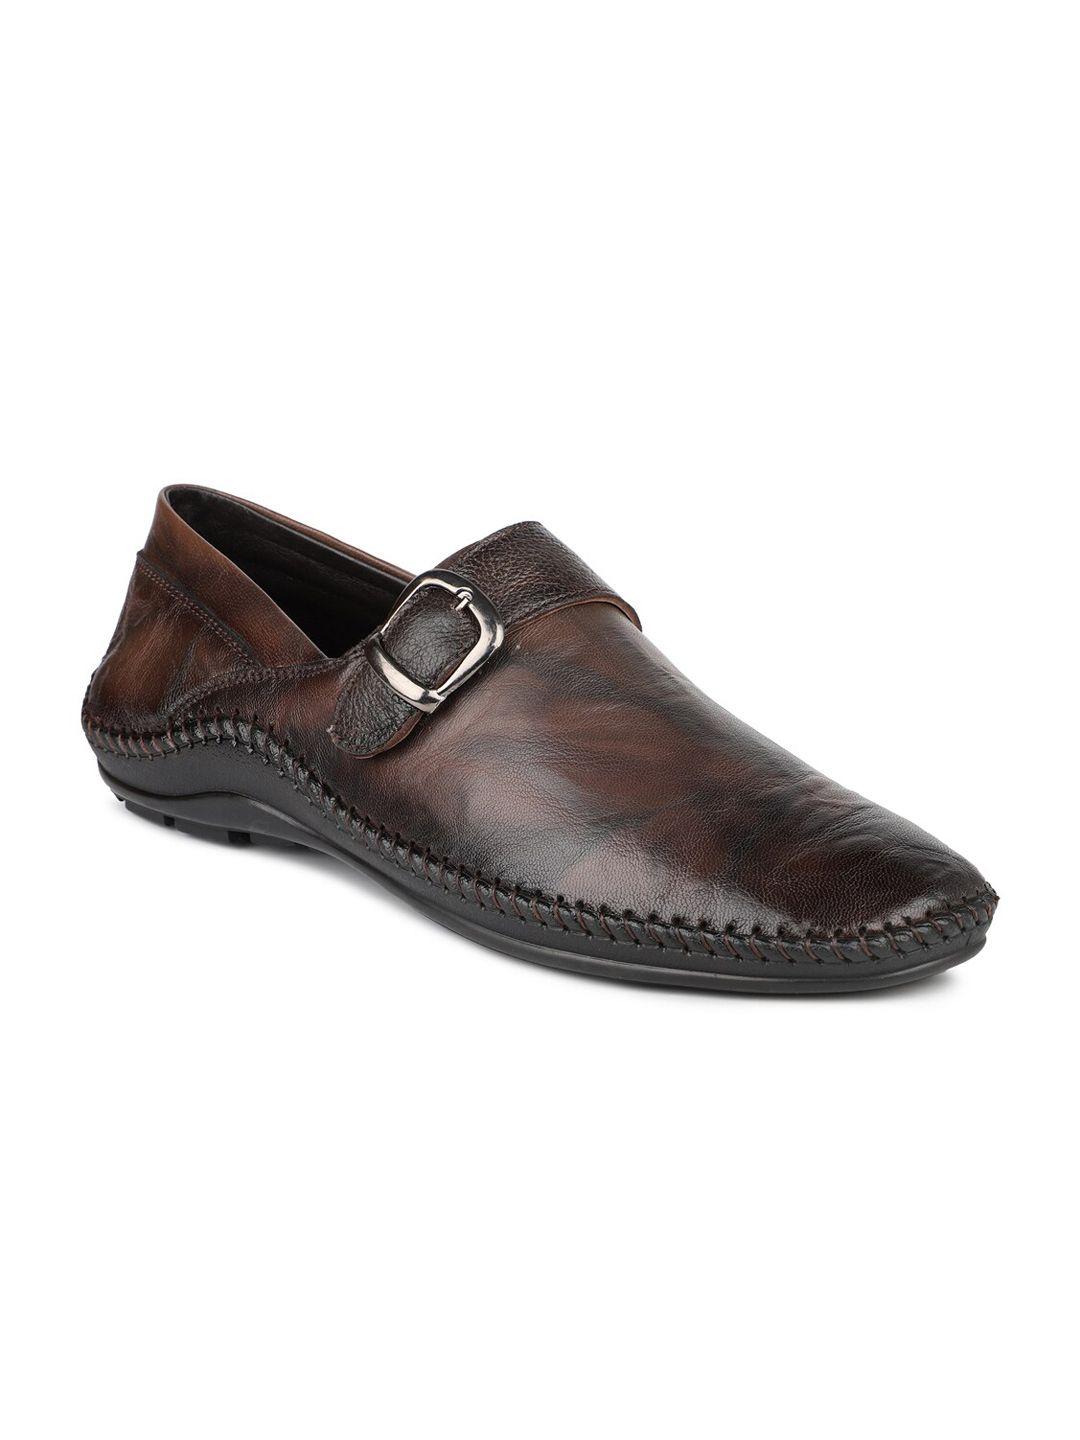 privo men's brown leather loafers